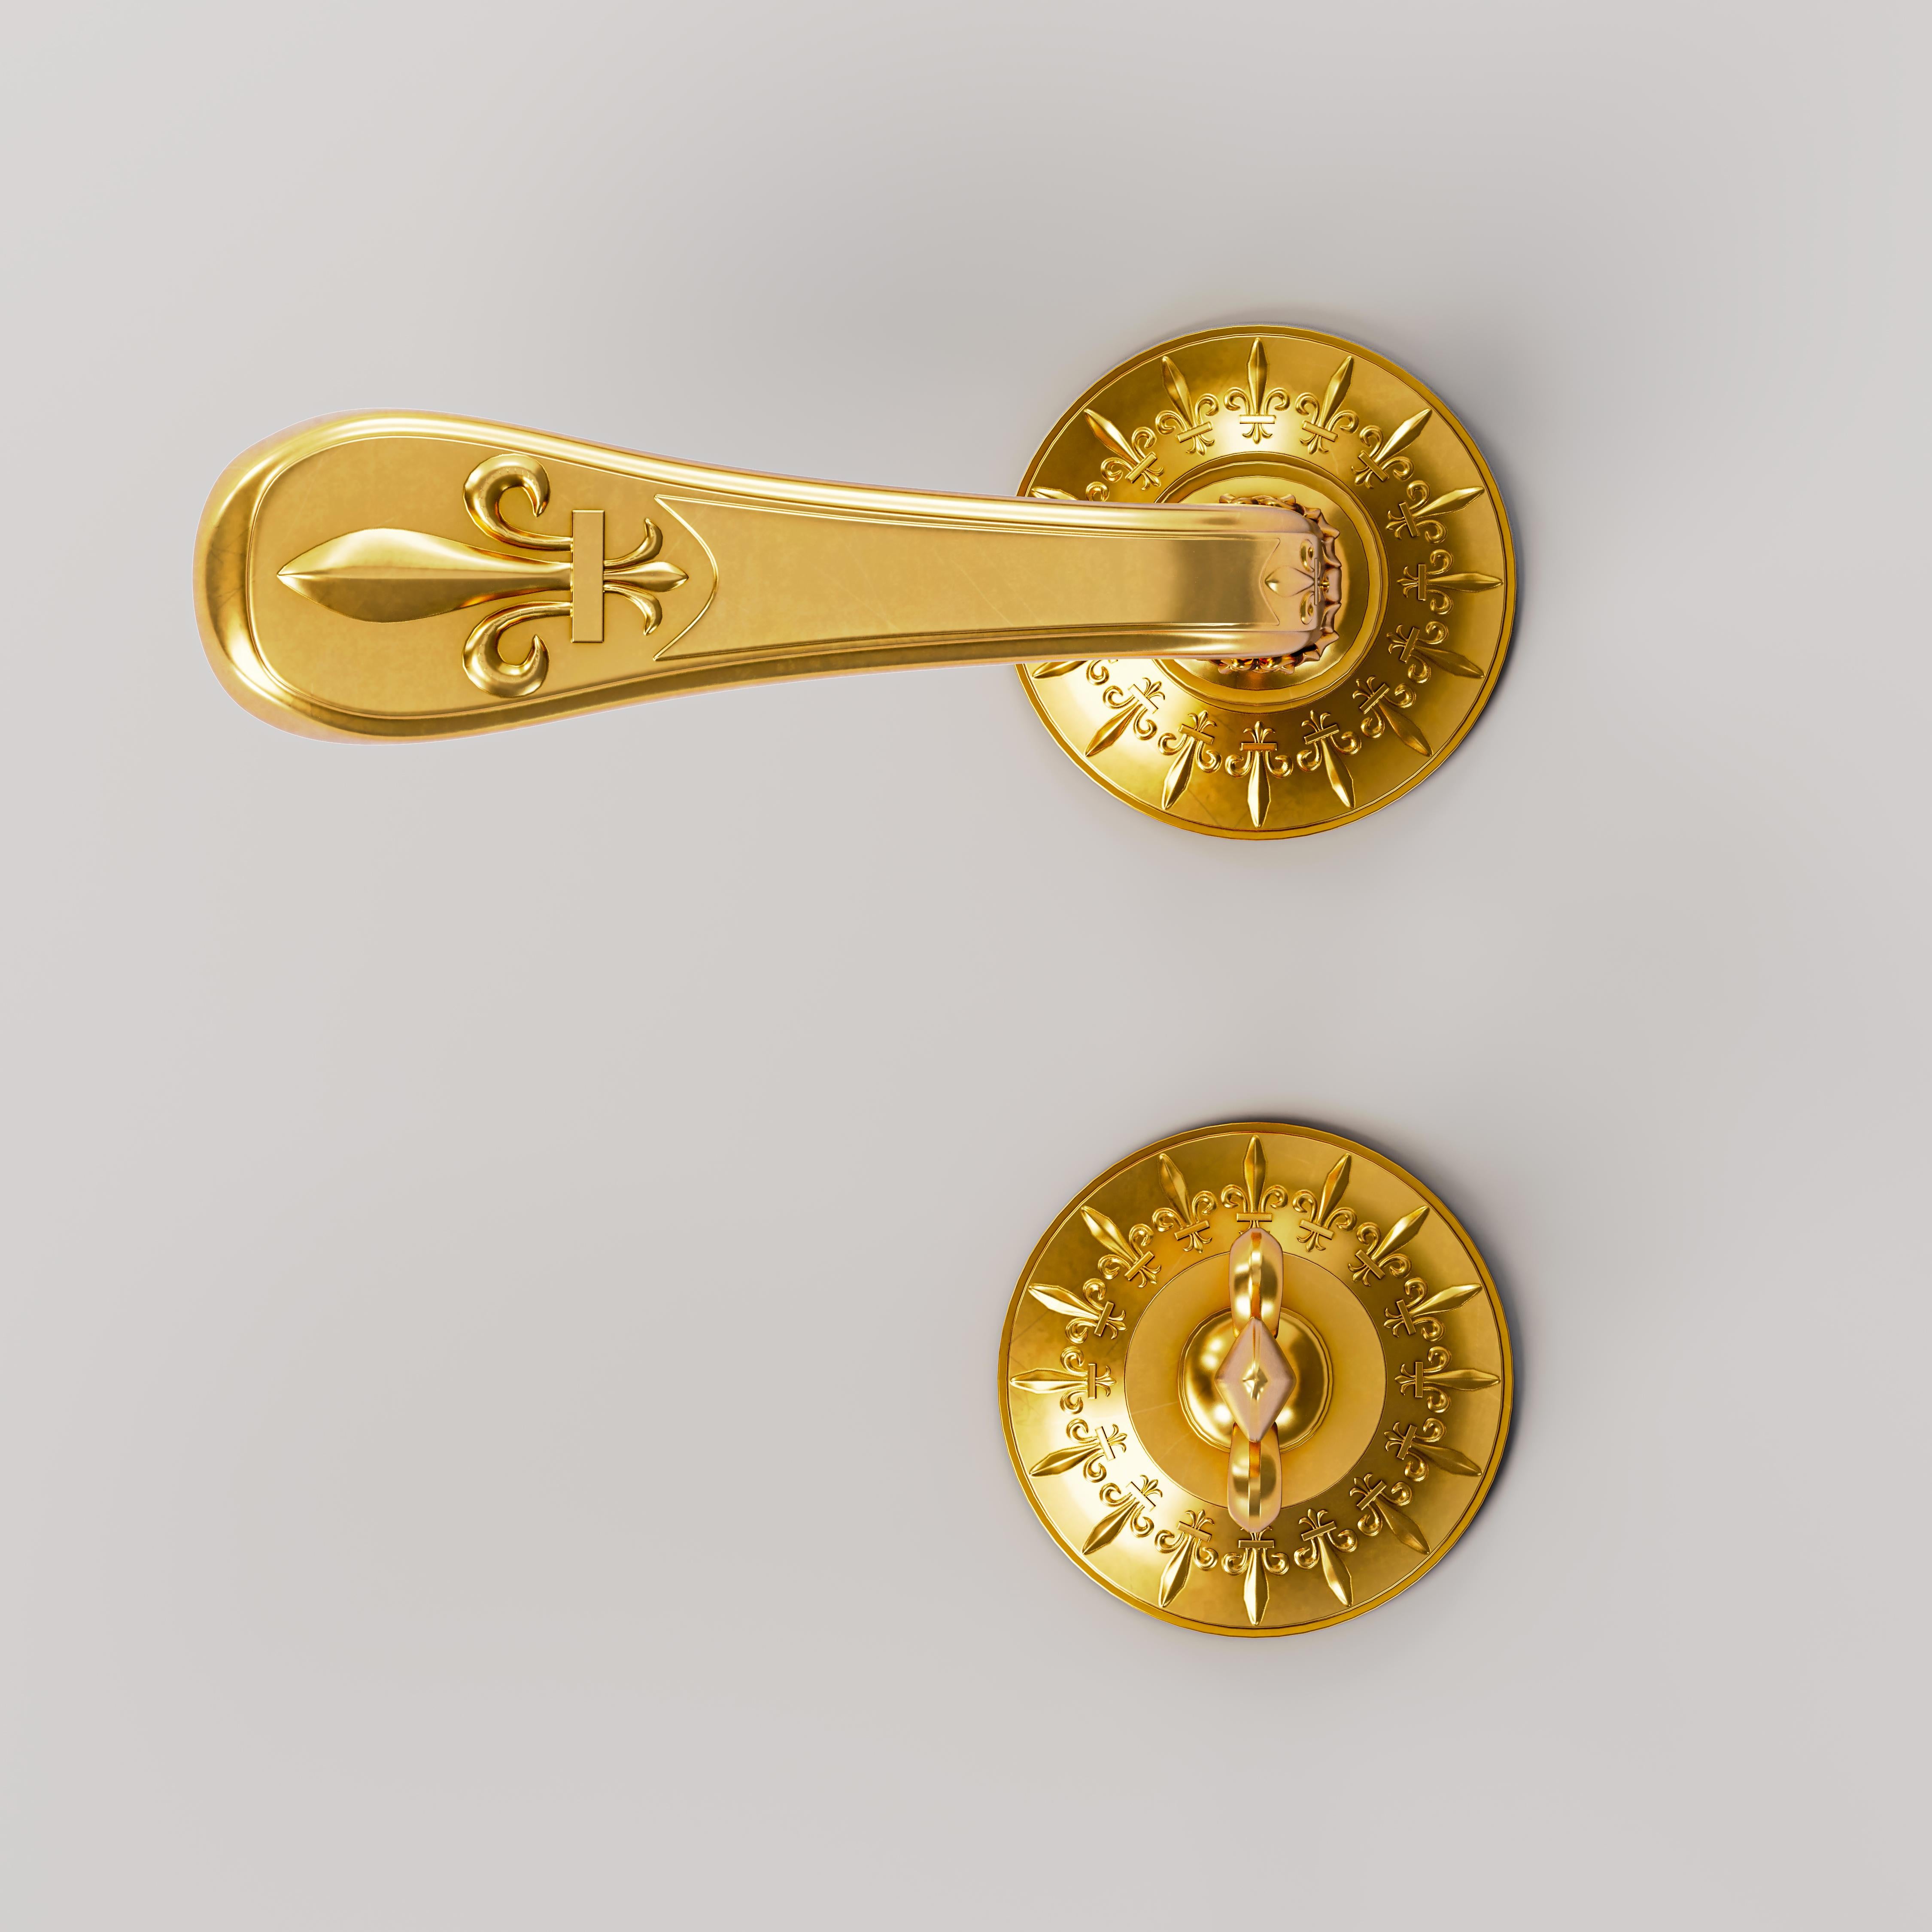 Set Of 2 Versailles Doré Brass Door Handles With Condamnation by Jérôme Bugara
Dimensions: D 5 x W 13,2 x H 6 cm.
Materials: Brass.

Available in different finishes. Please contact us.

Collaboration with Remy Garnier, french art bronzier. Handmade